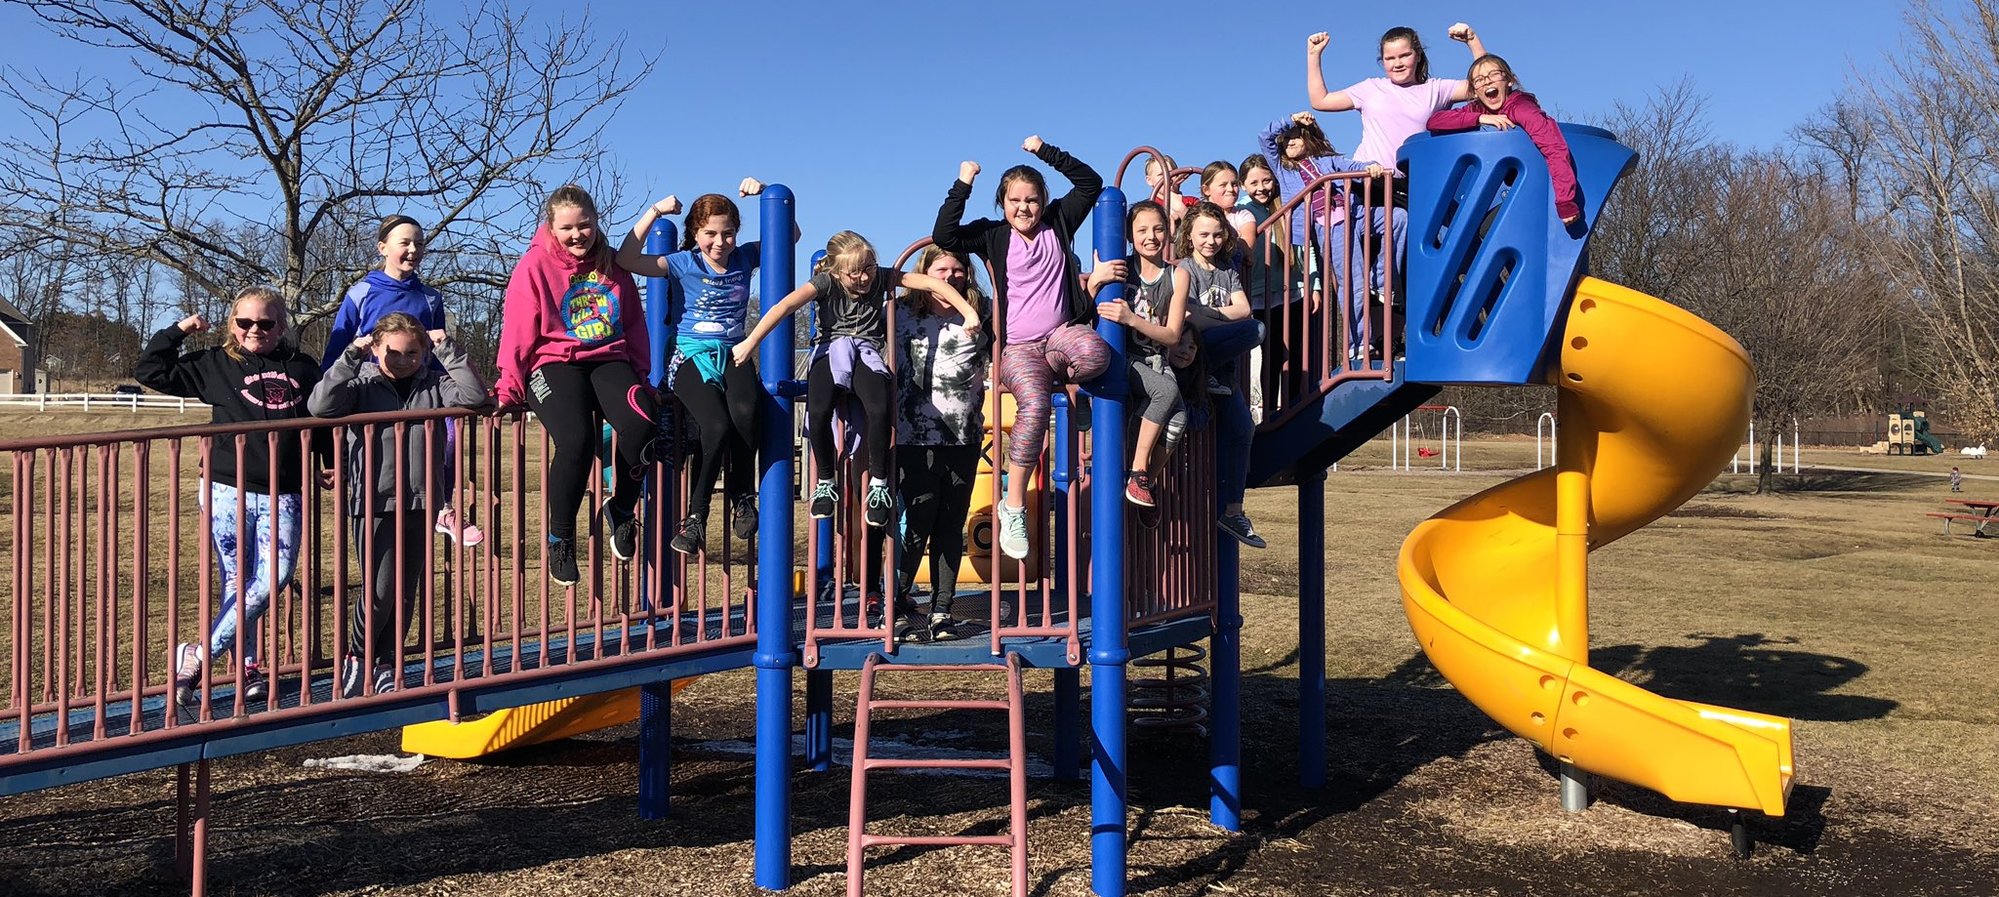 Patterson Girls Running Club posing on the play structure